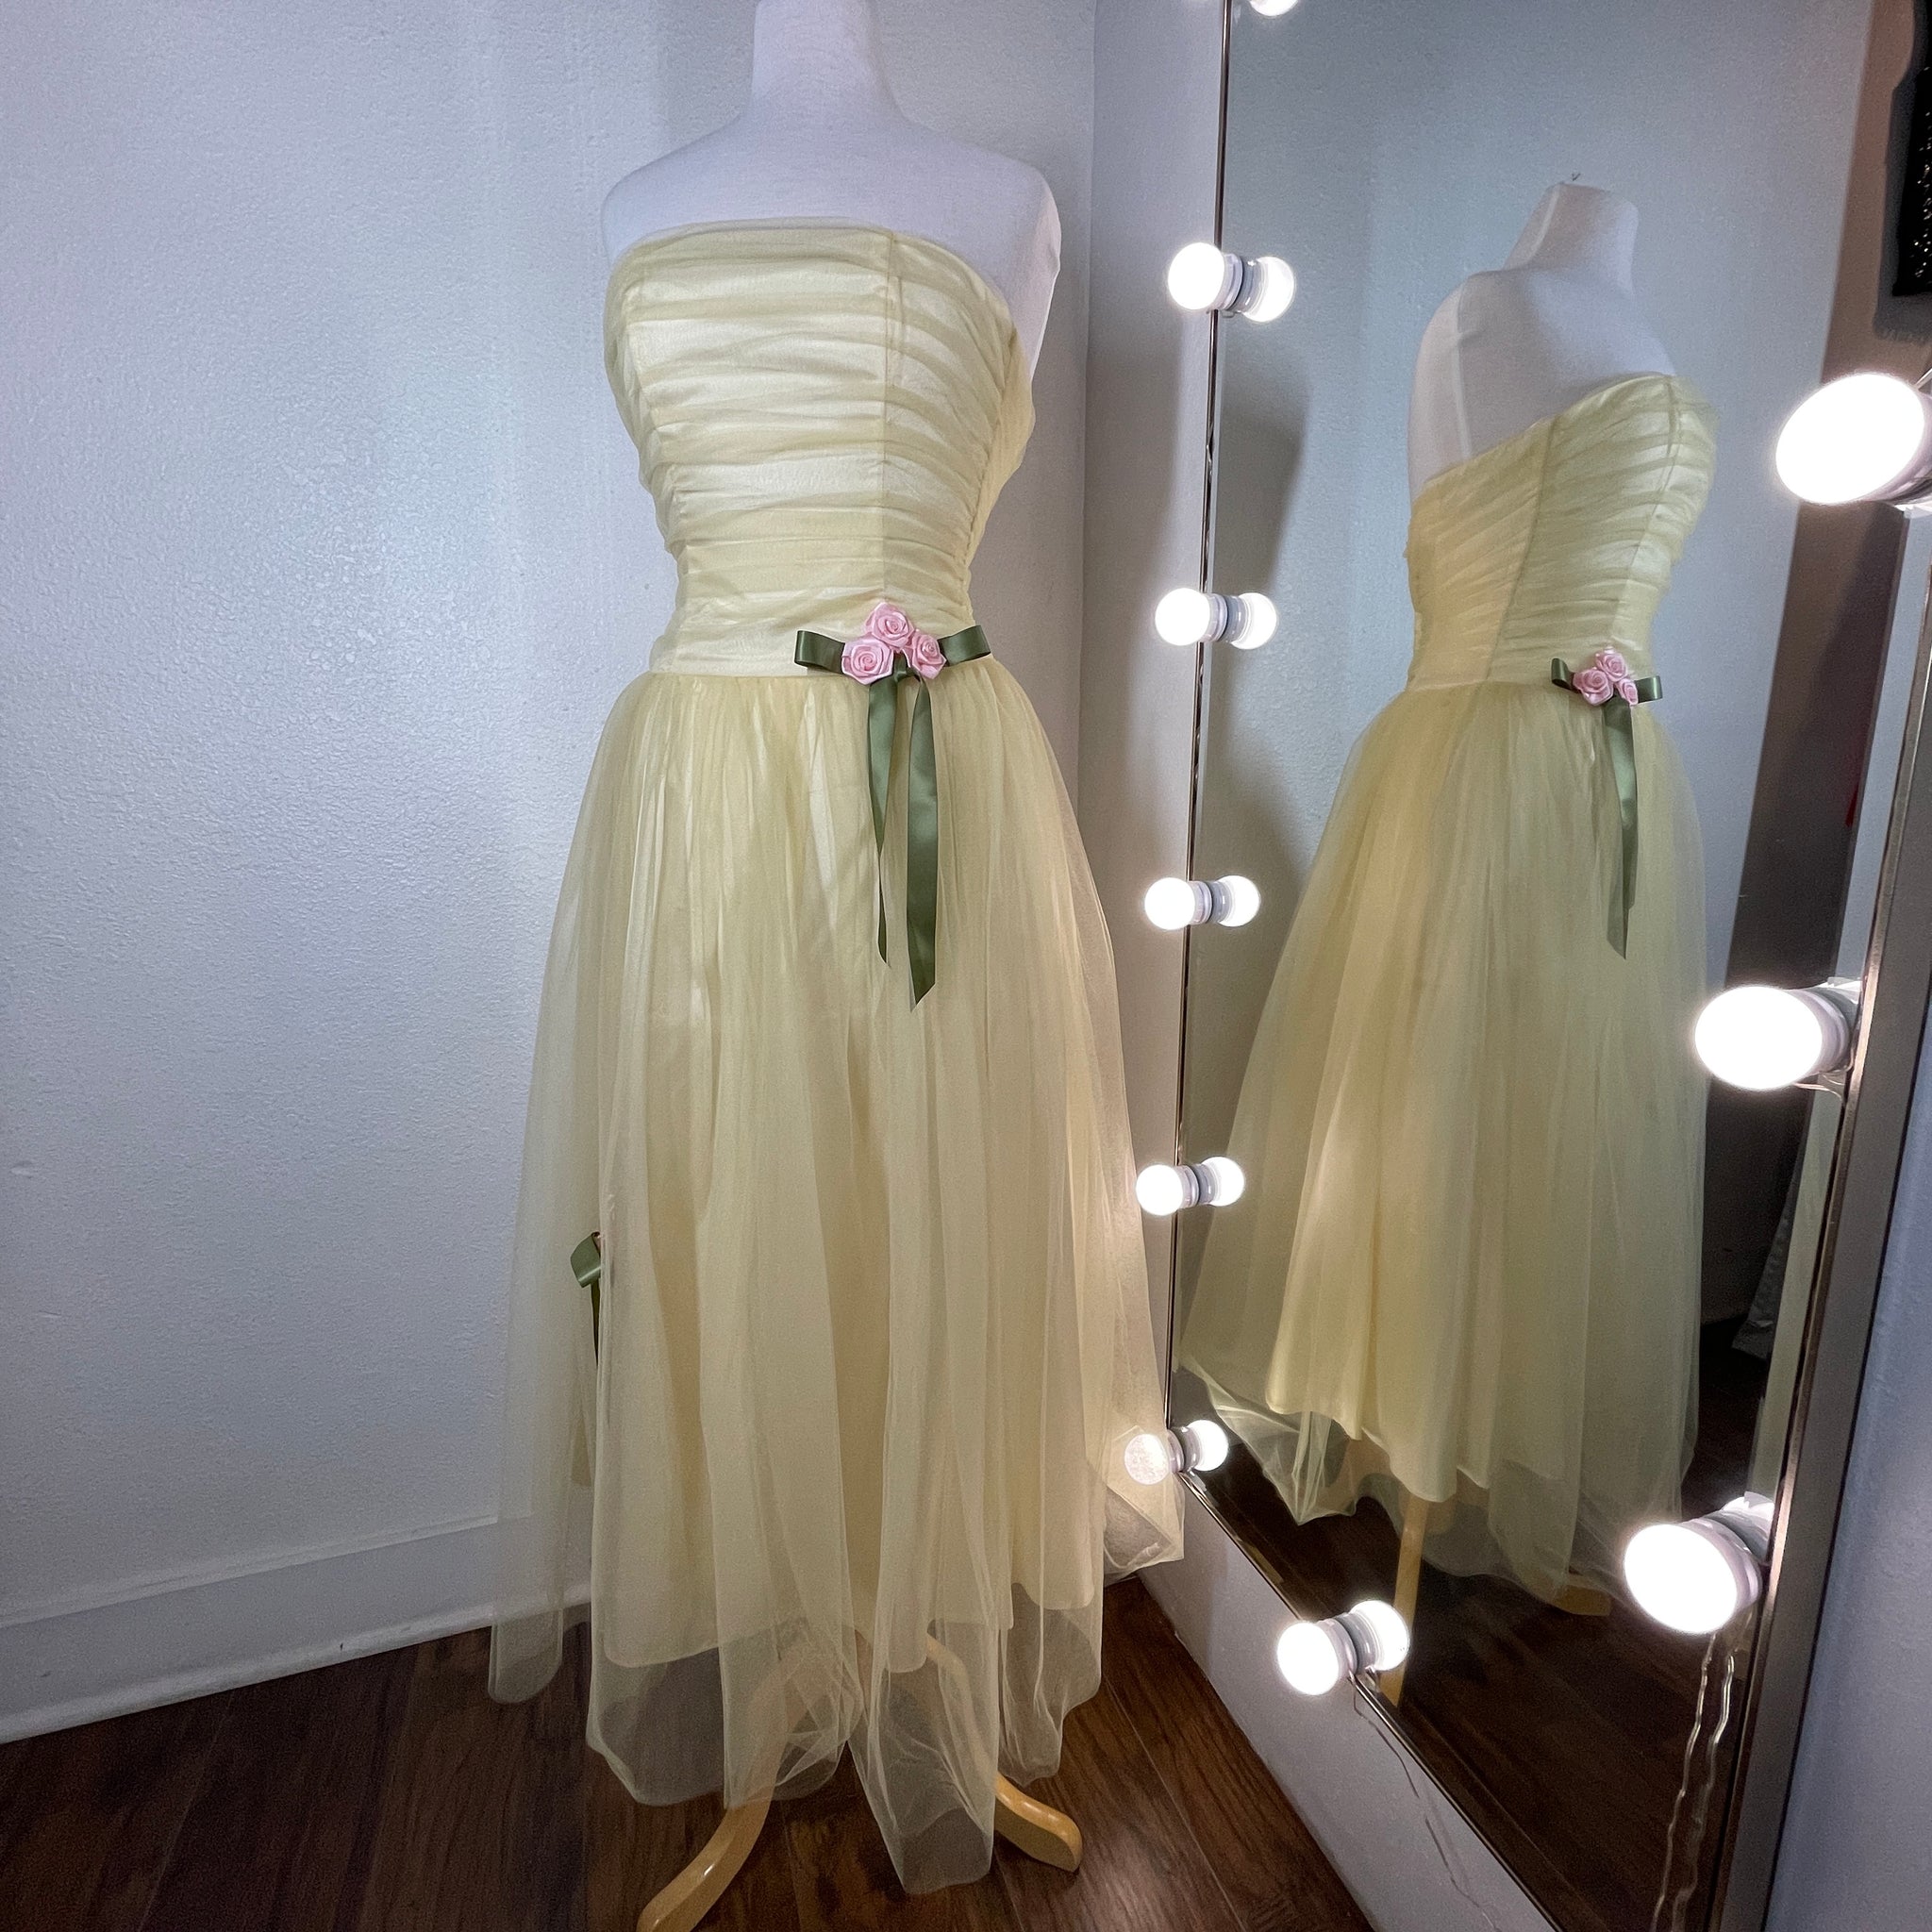 Gunne Sax For Jessica MC CLINTOCK Vintage Yellow Tulle Dress